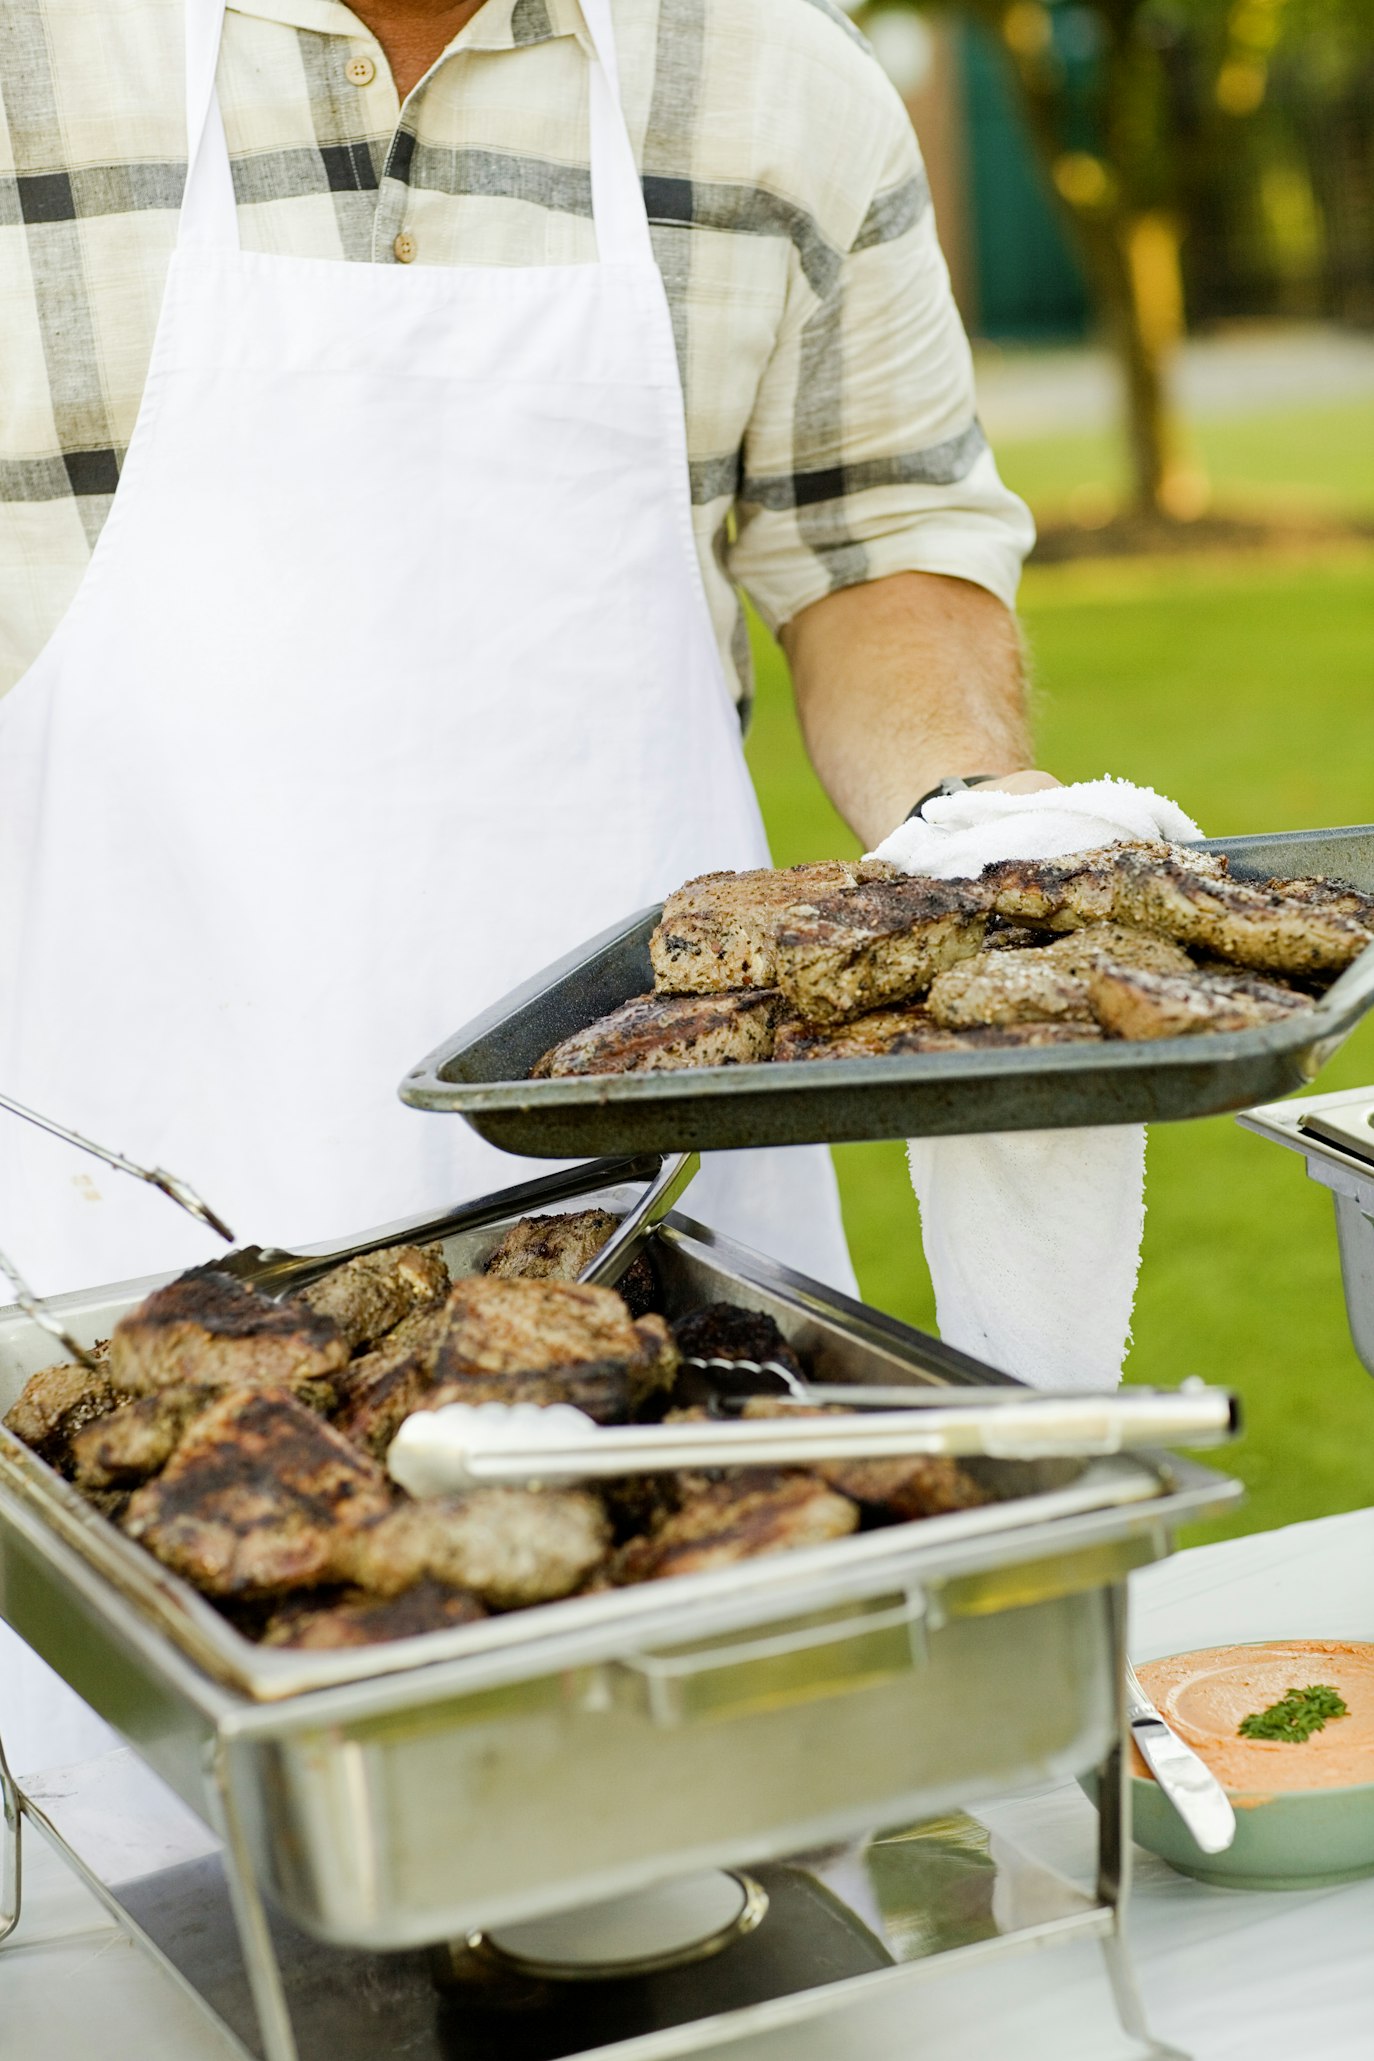 CATERING INSURANCE